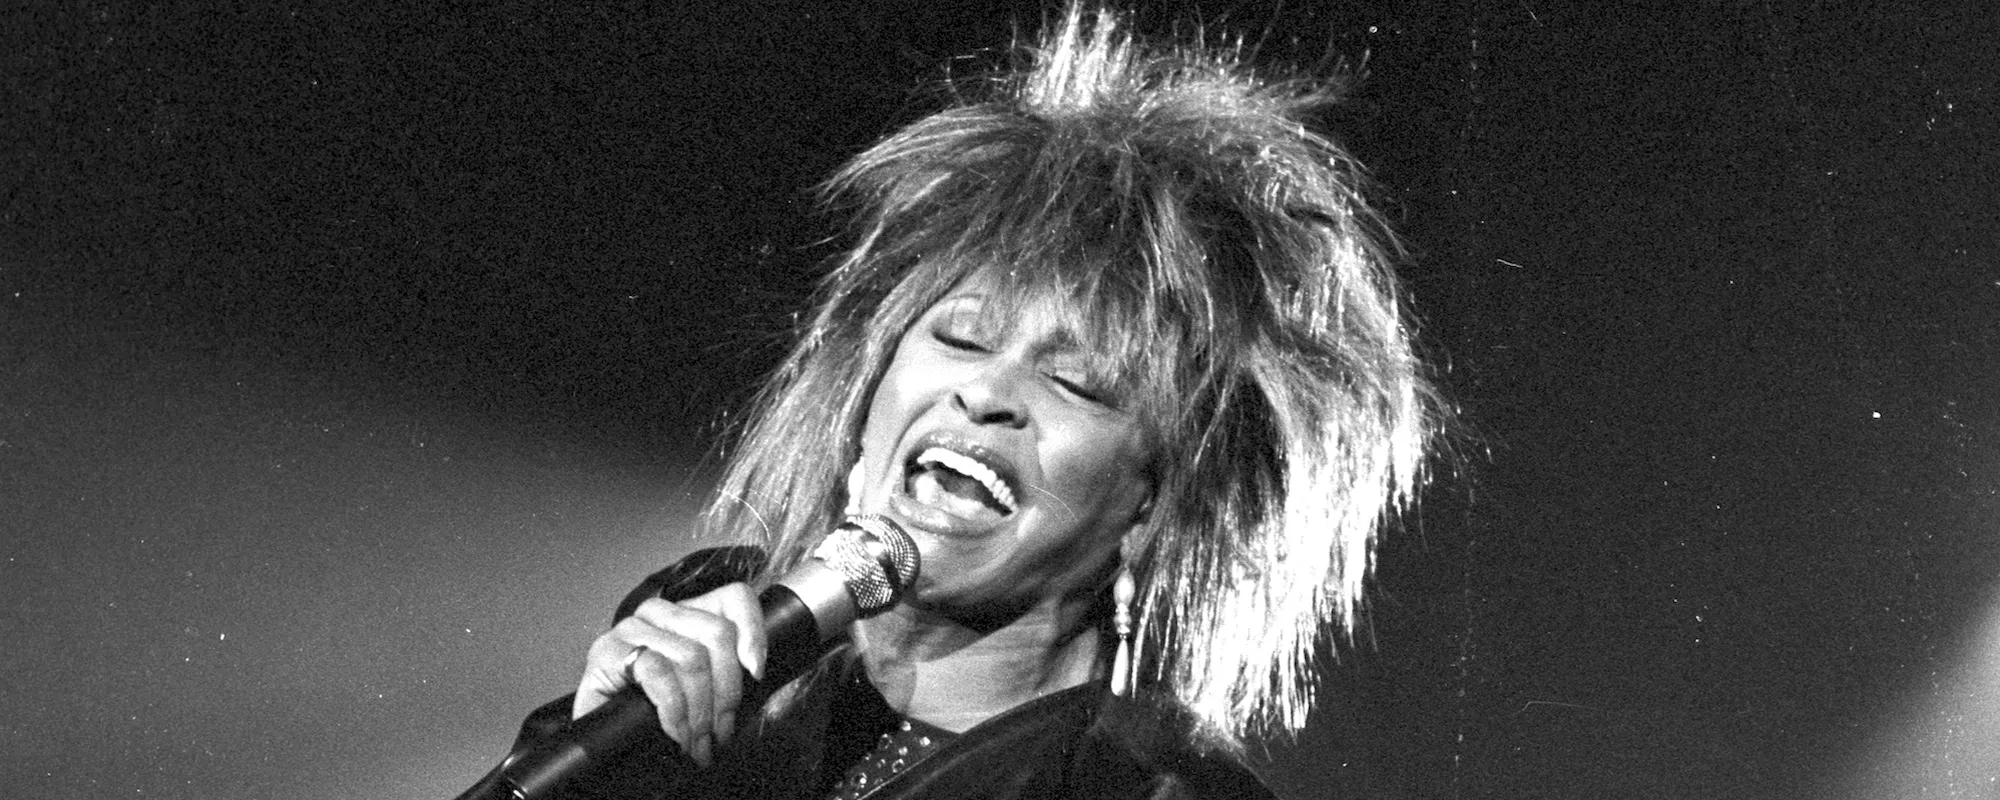 The German “Crush” That Sparked Tina Turner’s Hit “Better Be Good to Me”